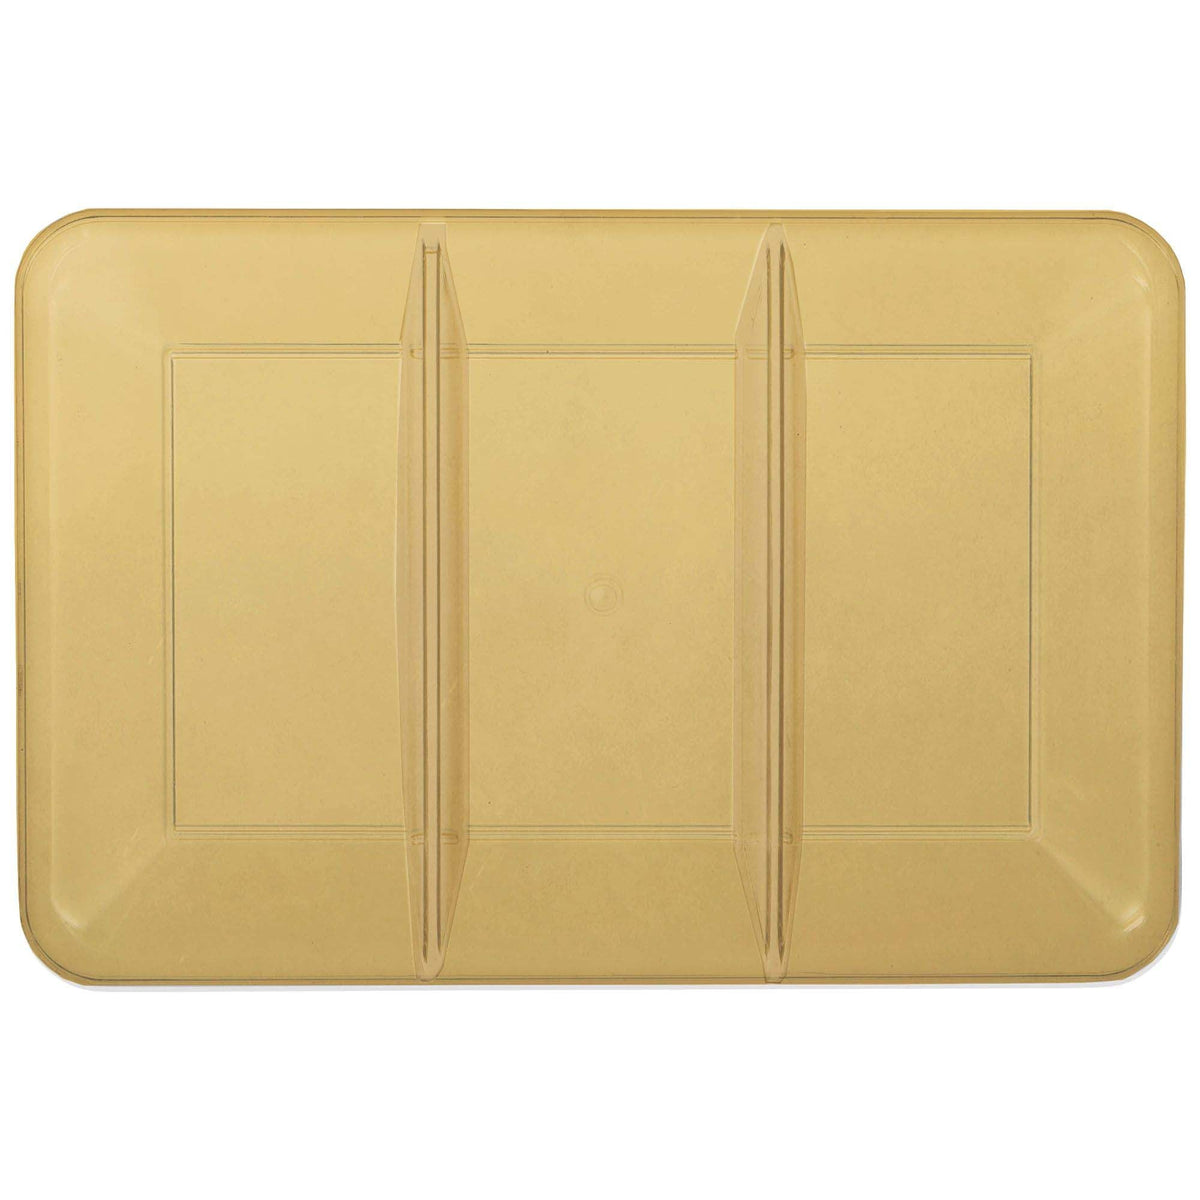 AMSCAN CA Disposable-Plasticware Compartment Tray, Gold, 9.5 x 14 Inches, 1 Count 192937439401